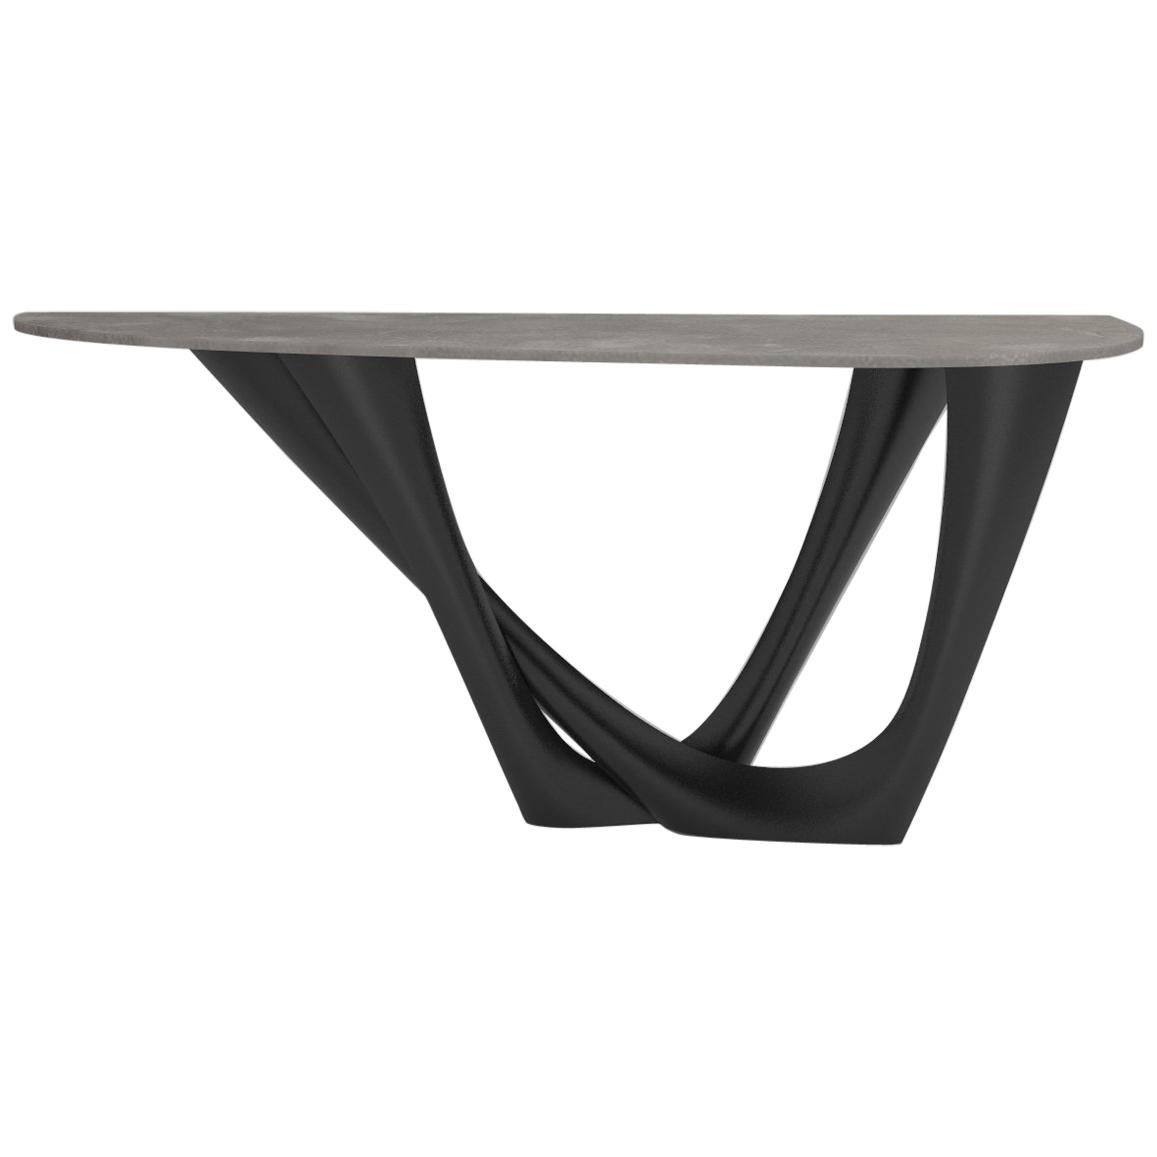 G-Console Table Duo in Powder-Coated Steel with Concrete Top by Zieta For Sale